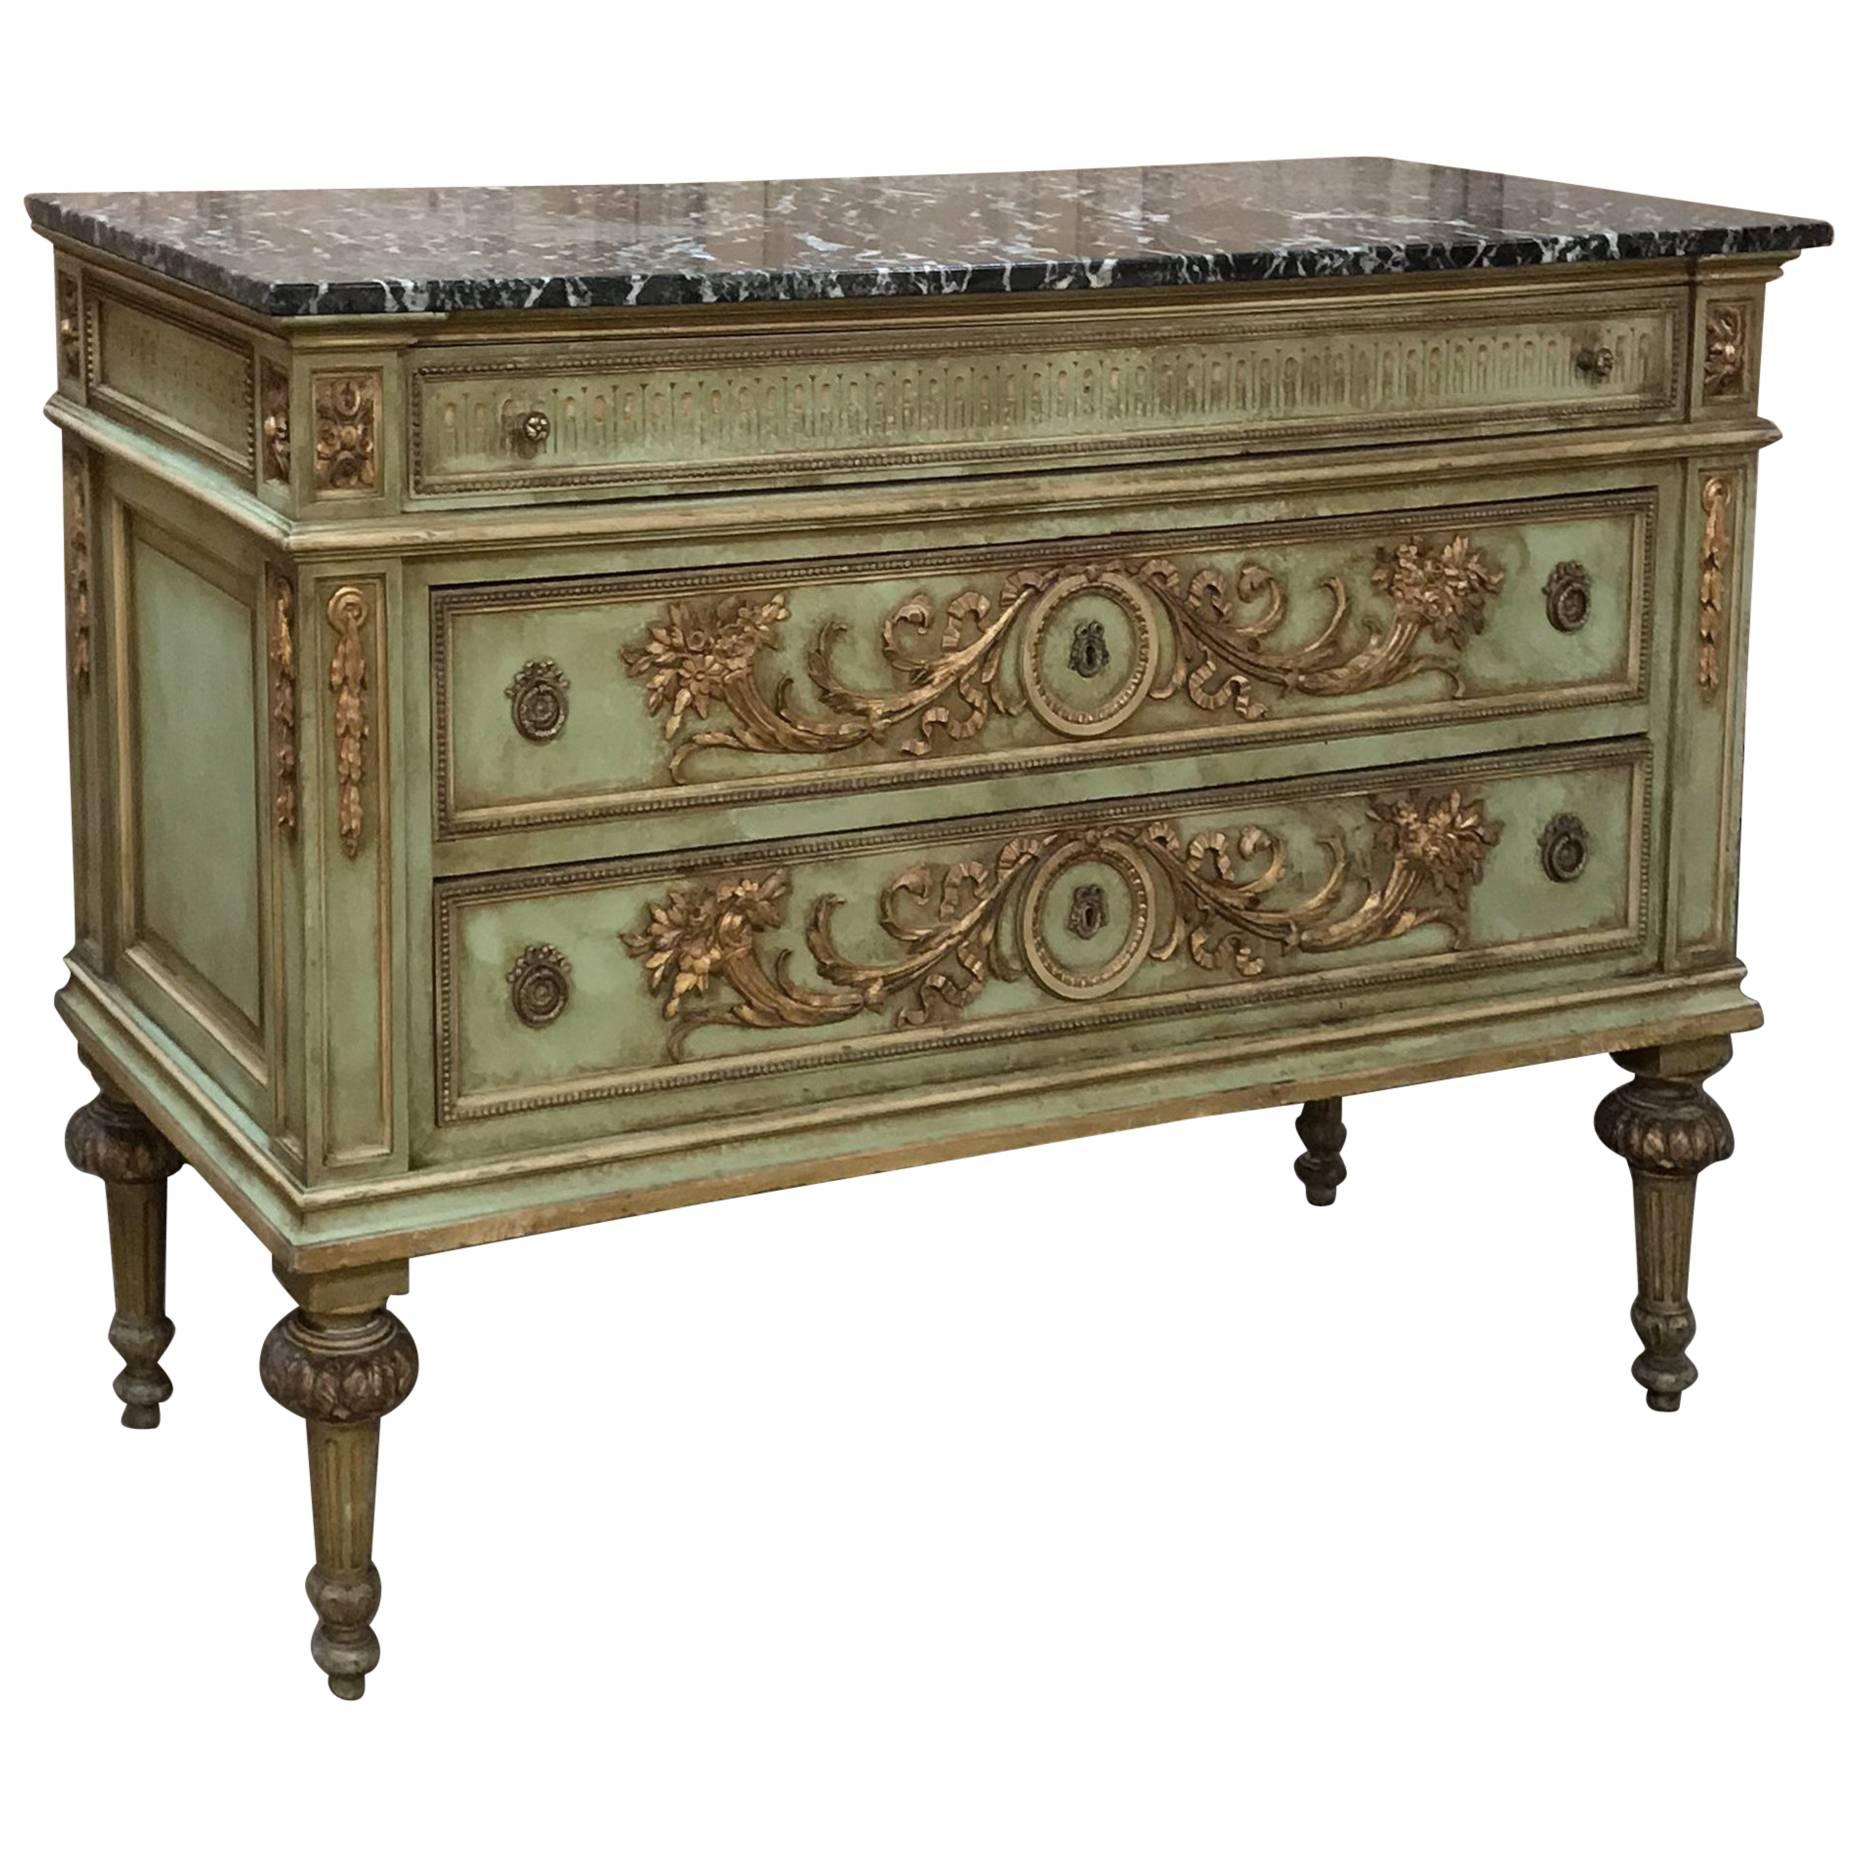 19th Century Italian Neoclassical Painted Marble-Top Commode